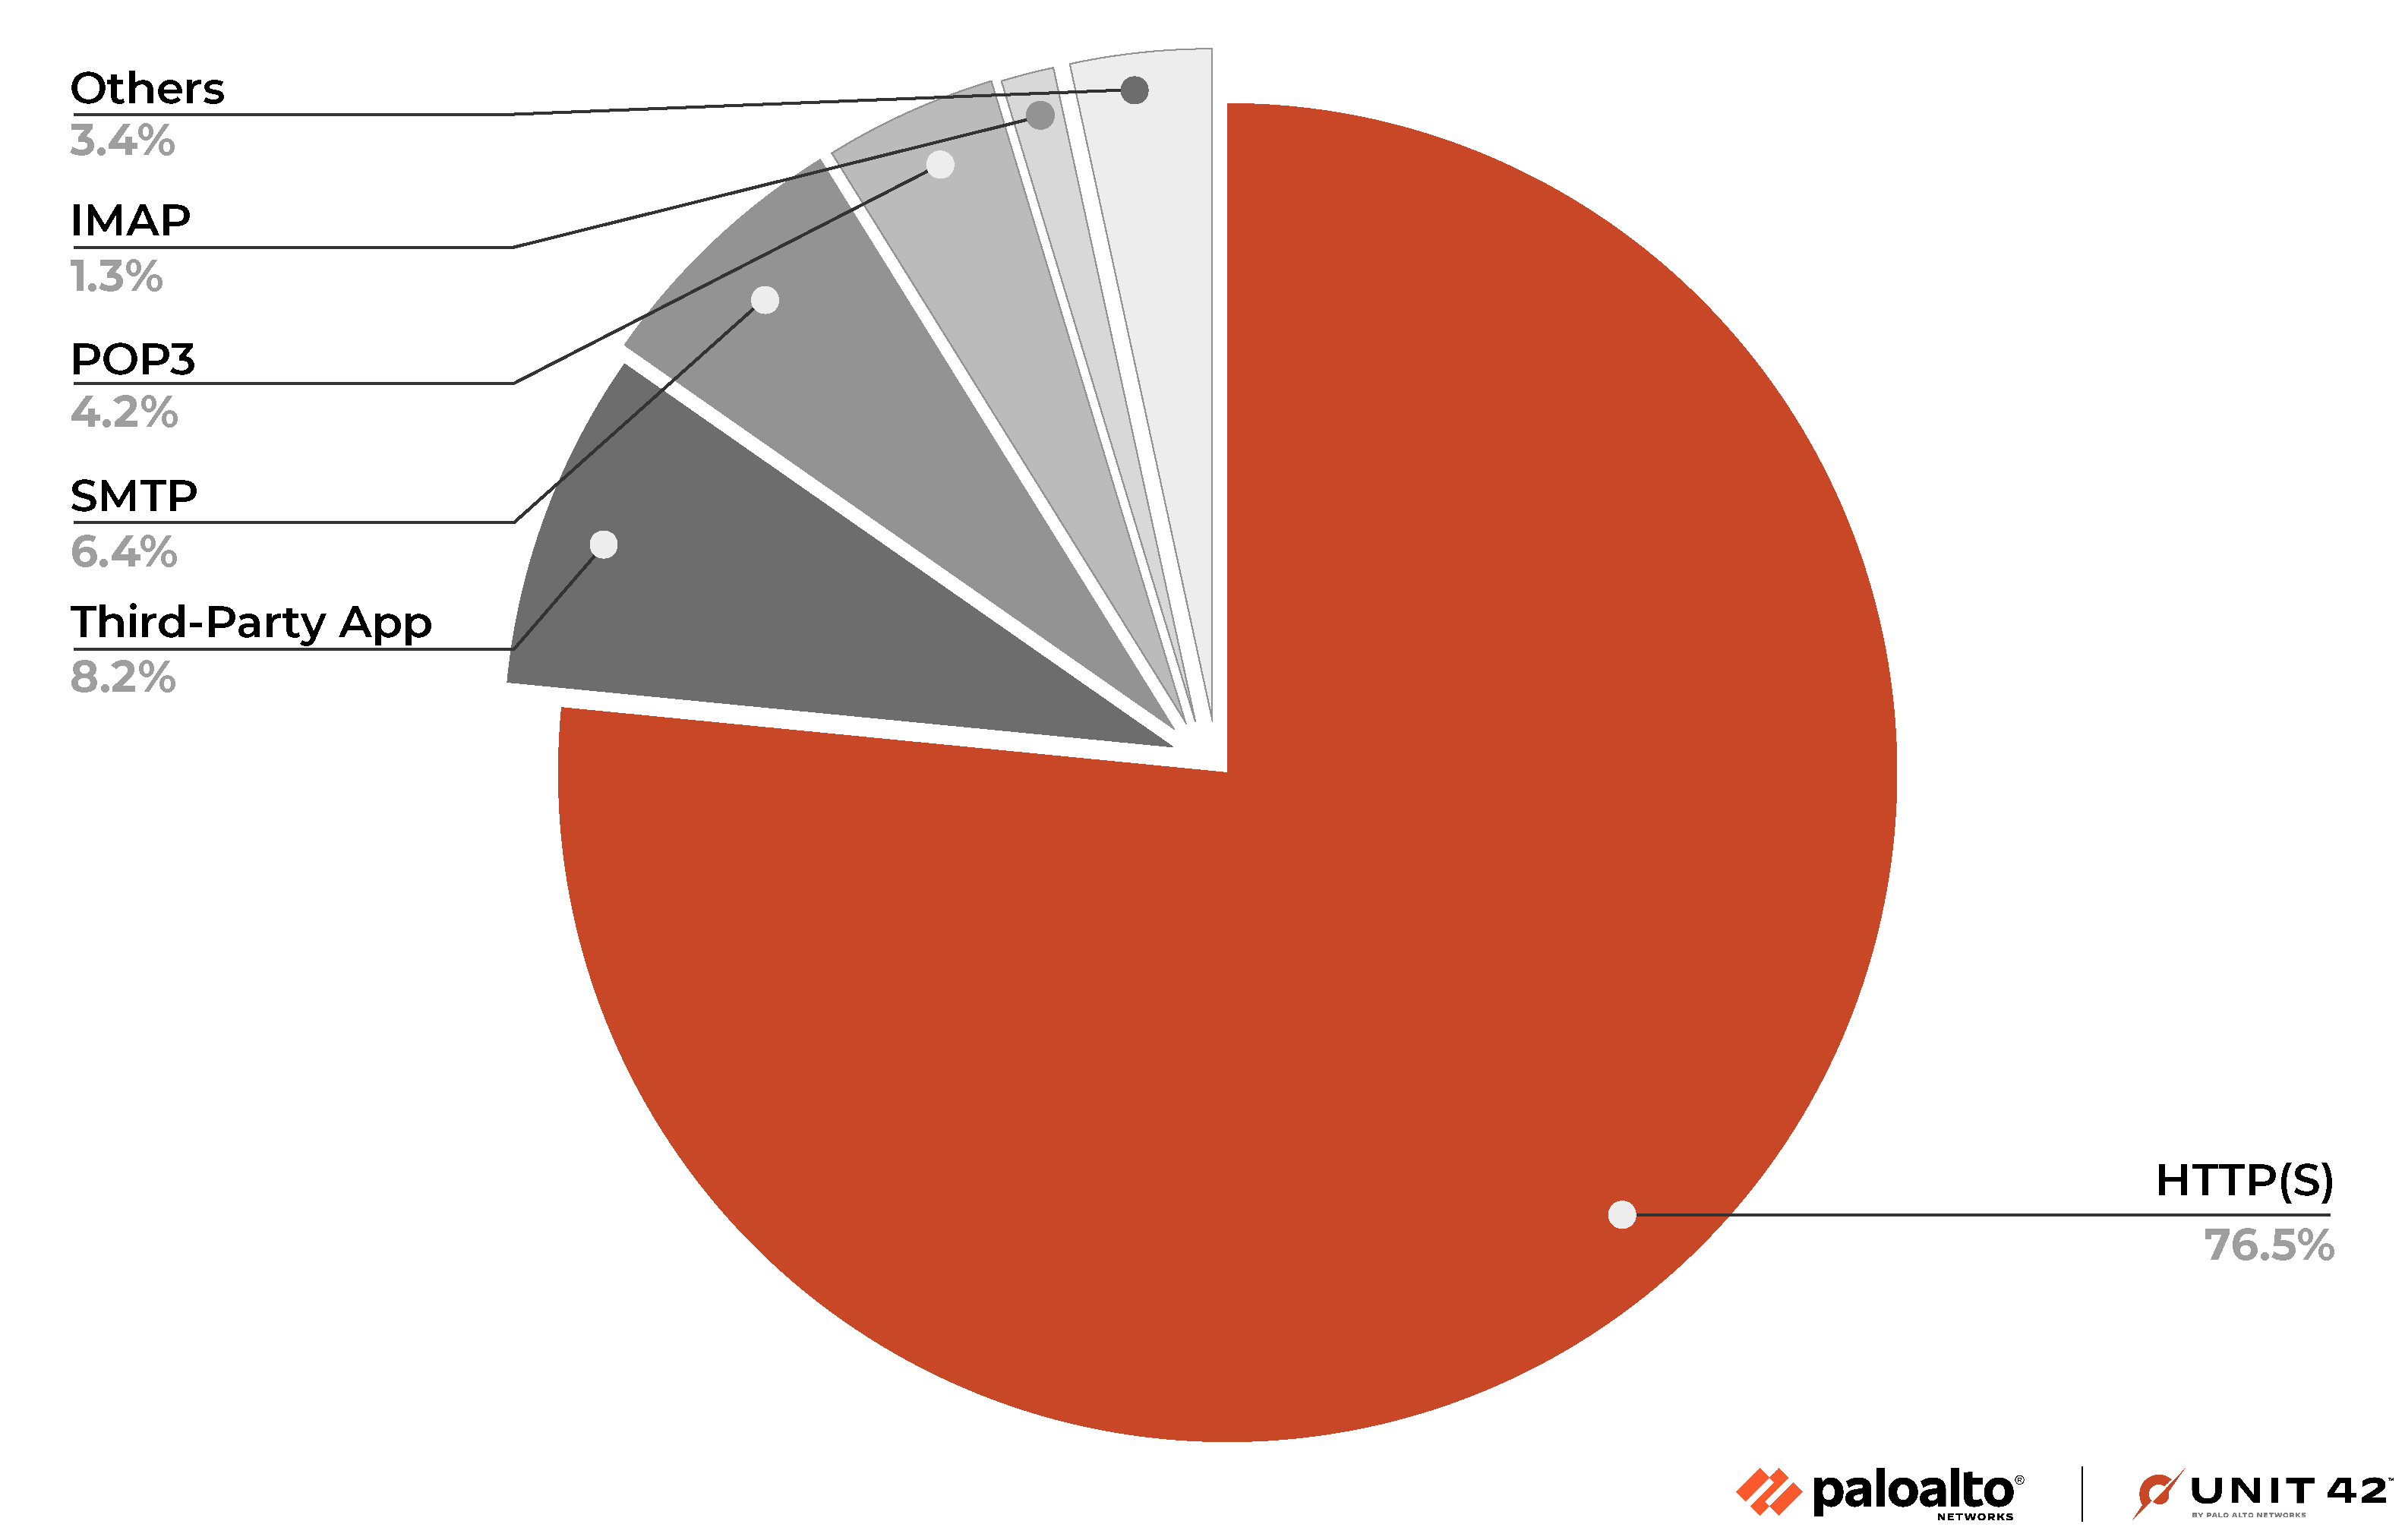 Image 1 is a graph of the percentage of arrival protocols used to deliver ransomware in 2022. The largest percentage is through HTTPS at 76.5%. 